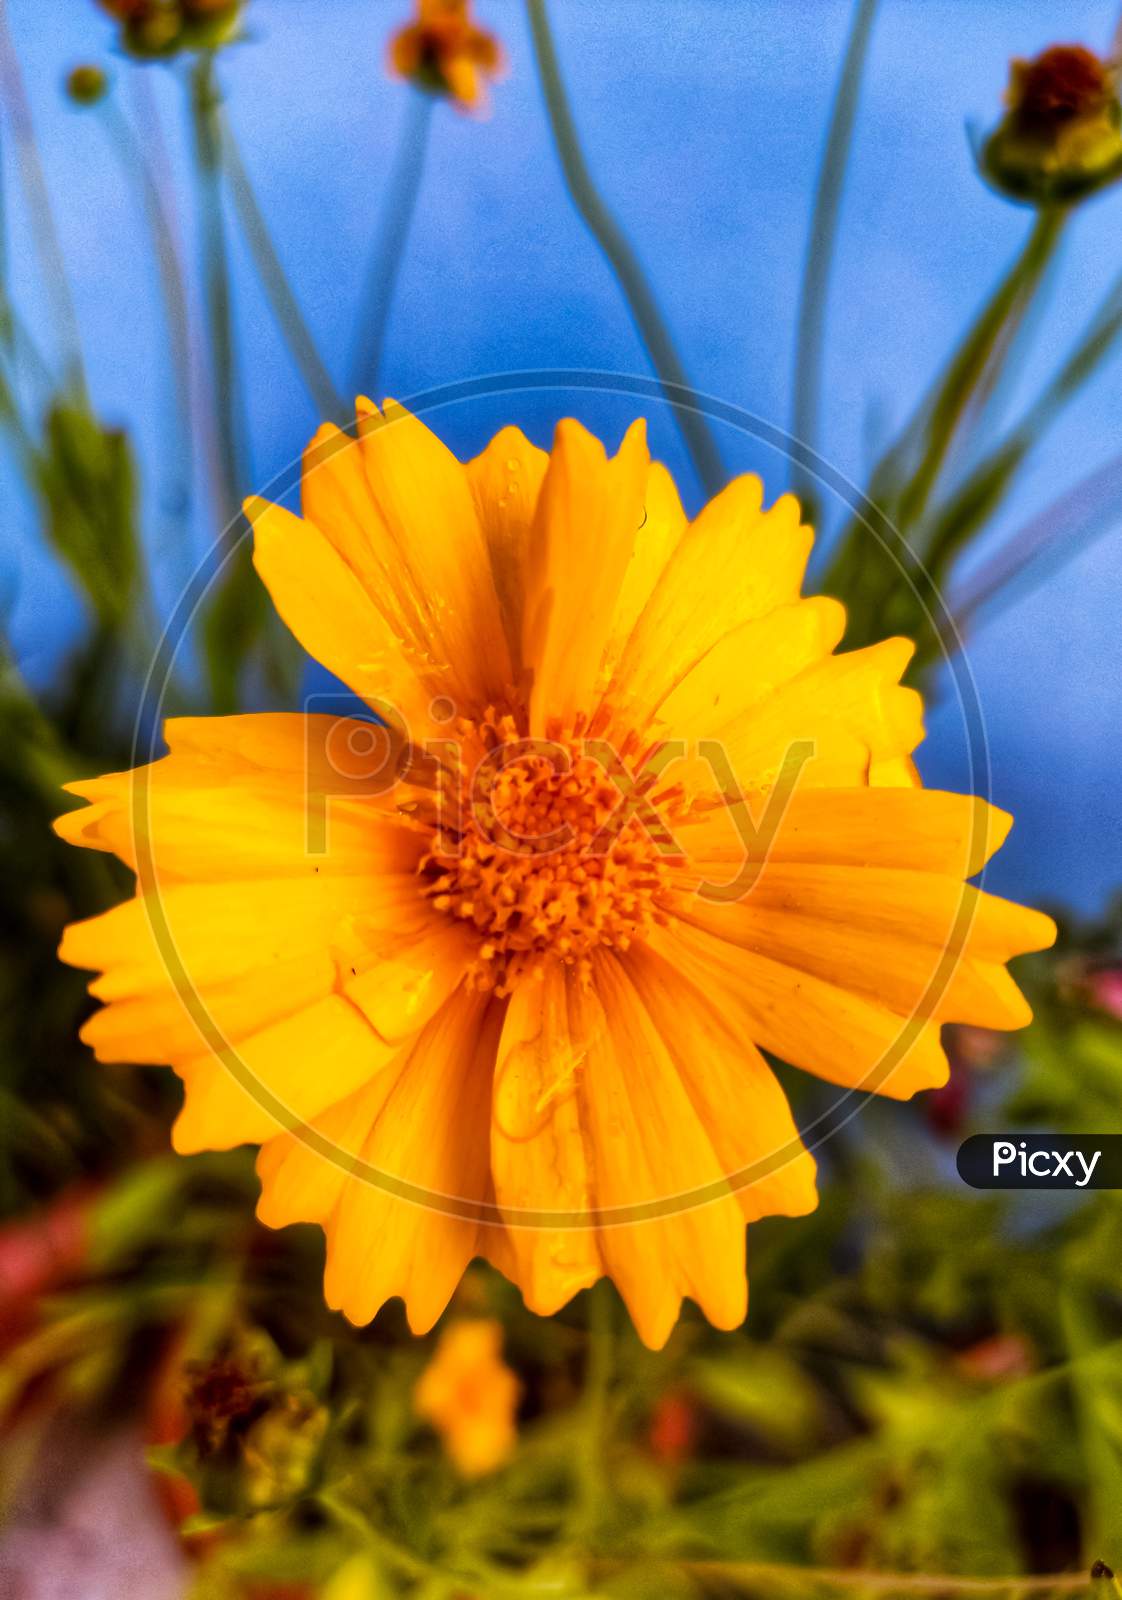 A beautiful marigold closeup with water droplets on the petals